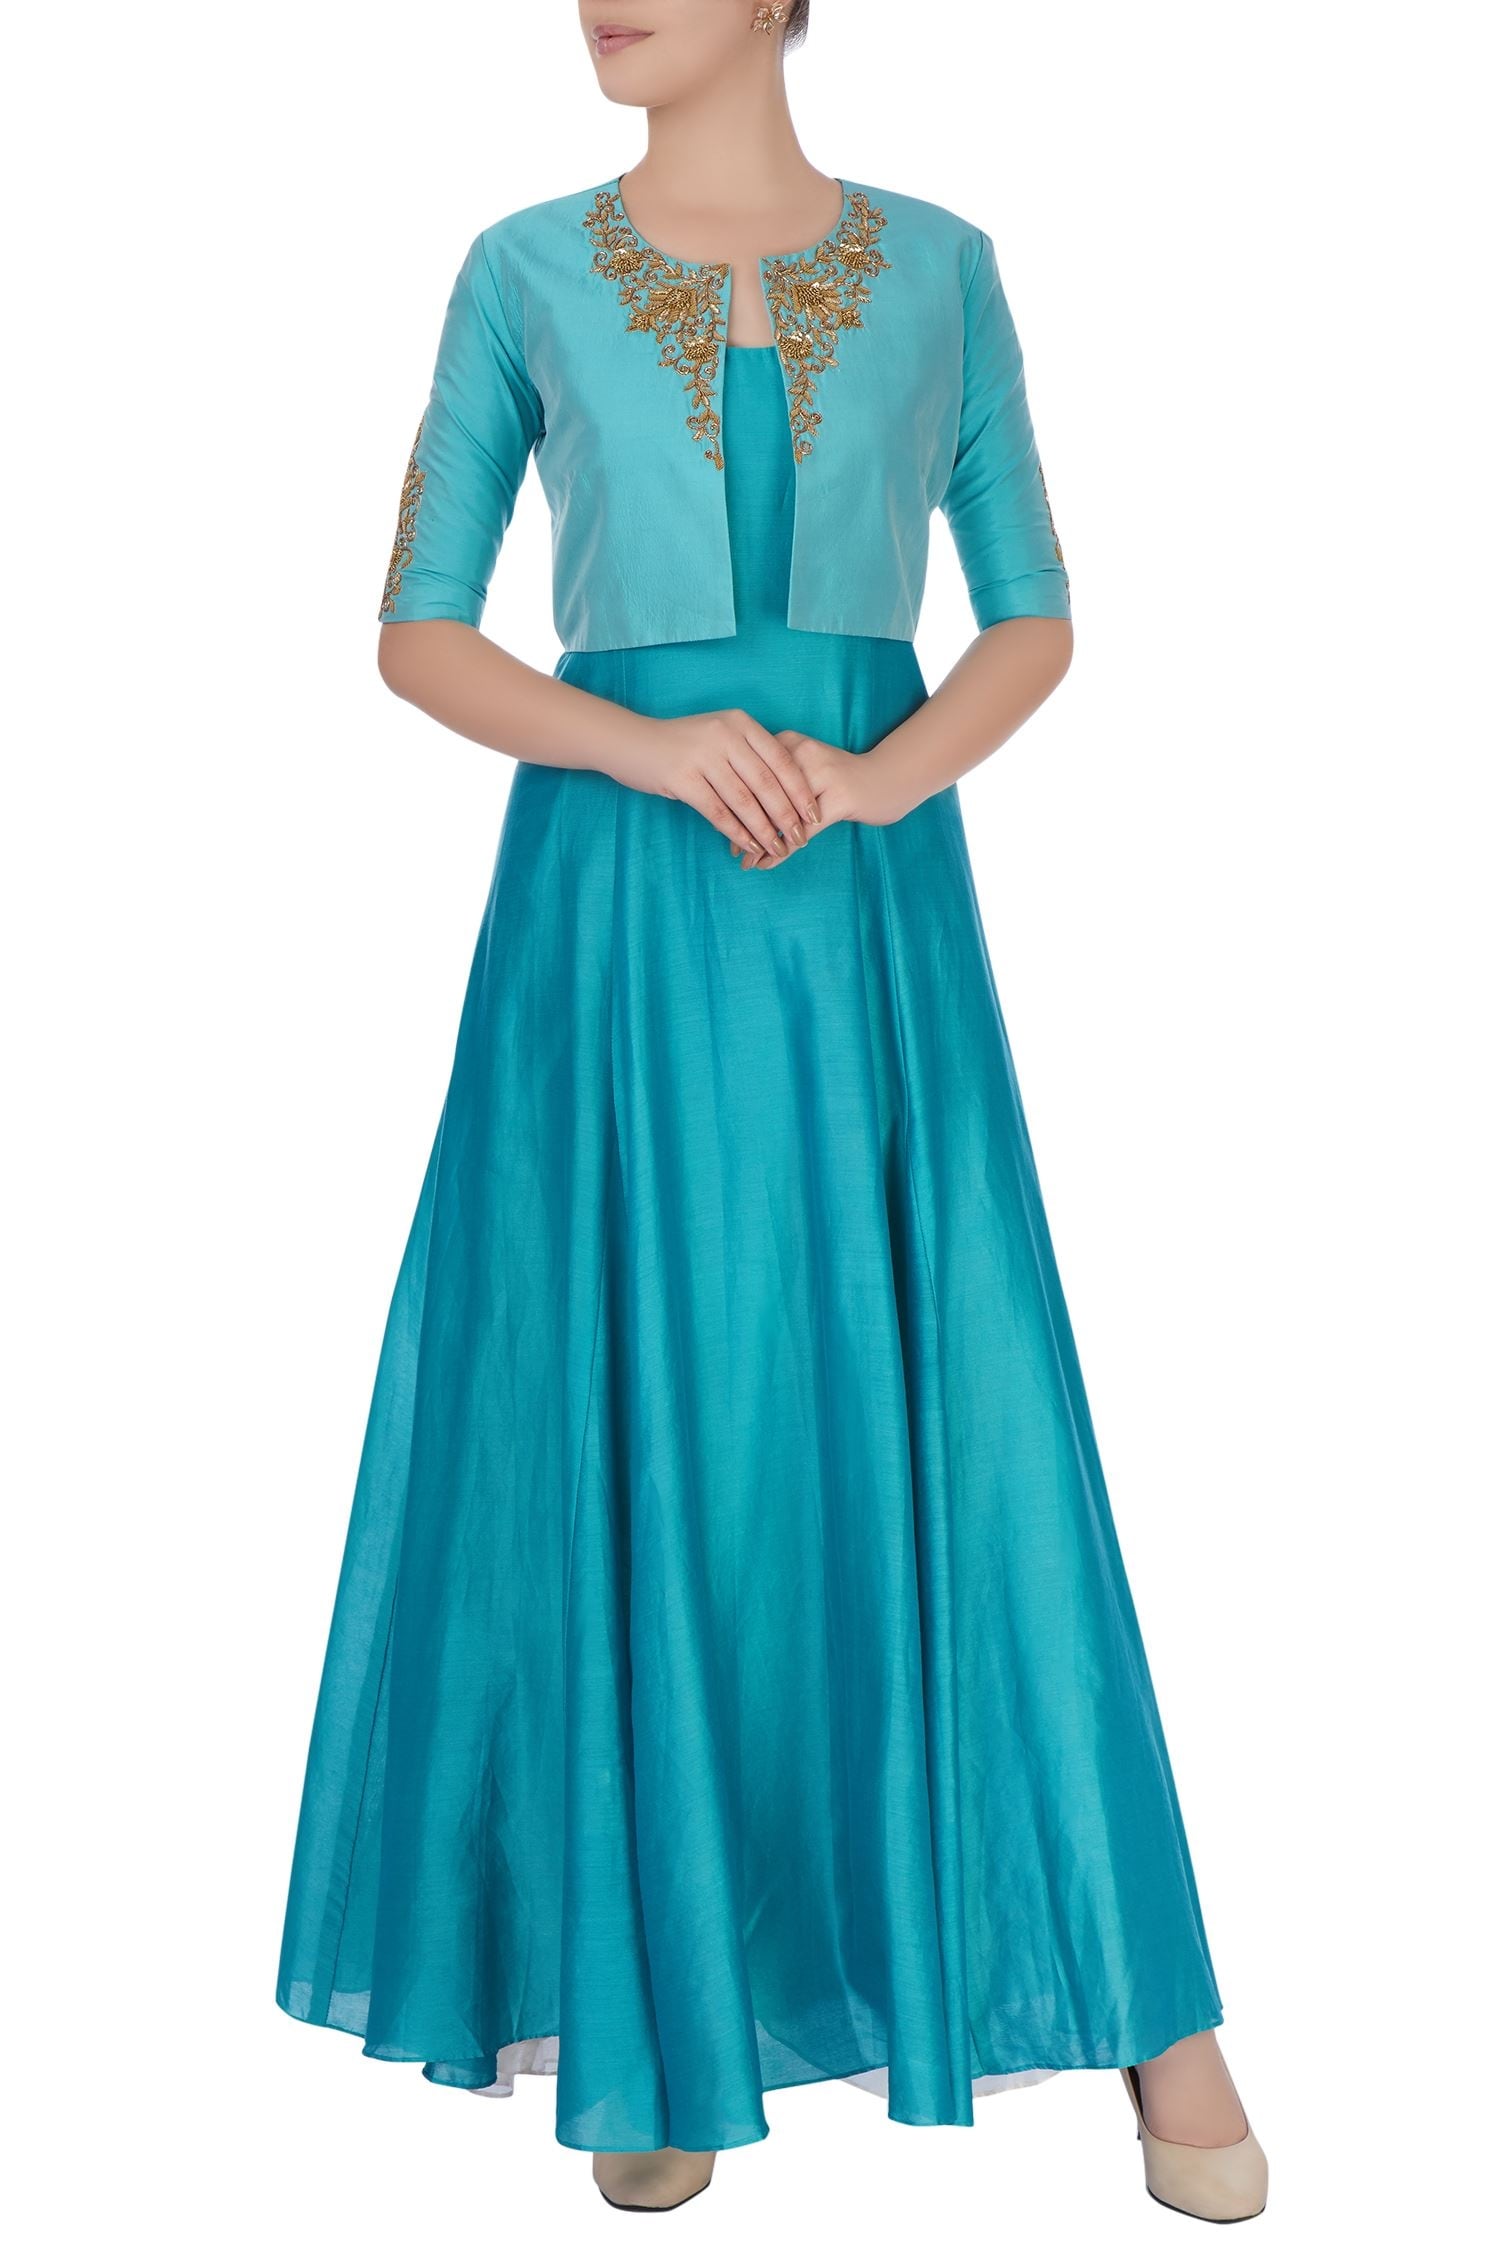 Buy Blue embroidered anarkali & jacket by Rachana Ved at Aza Fashions